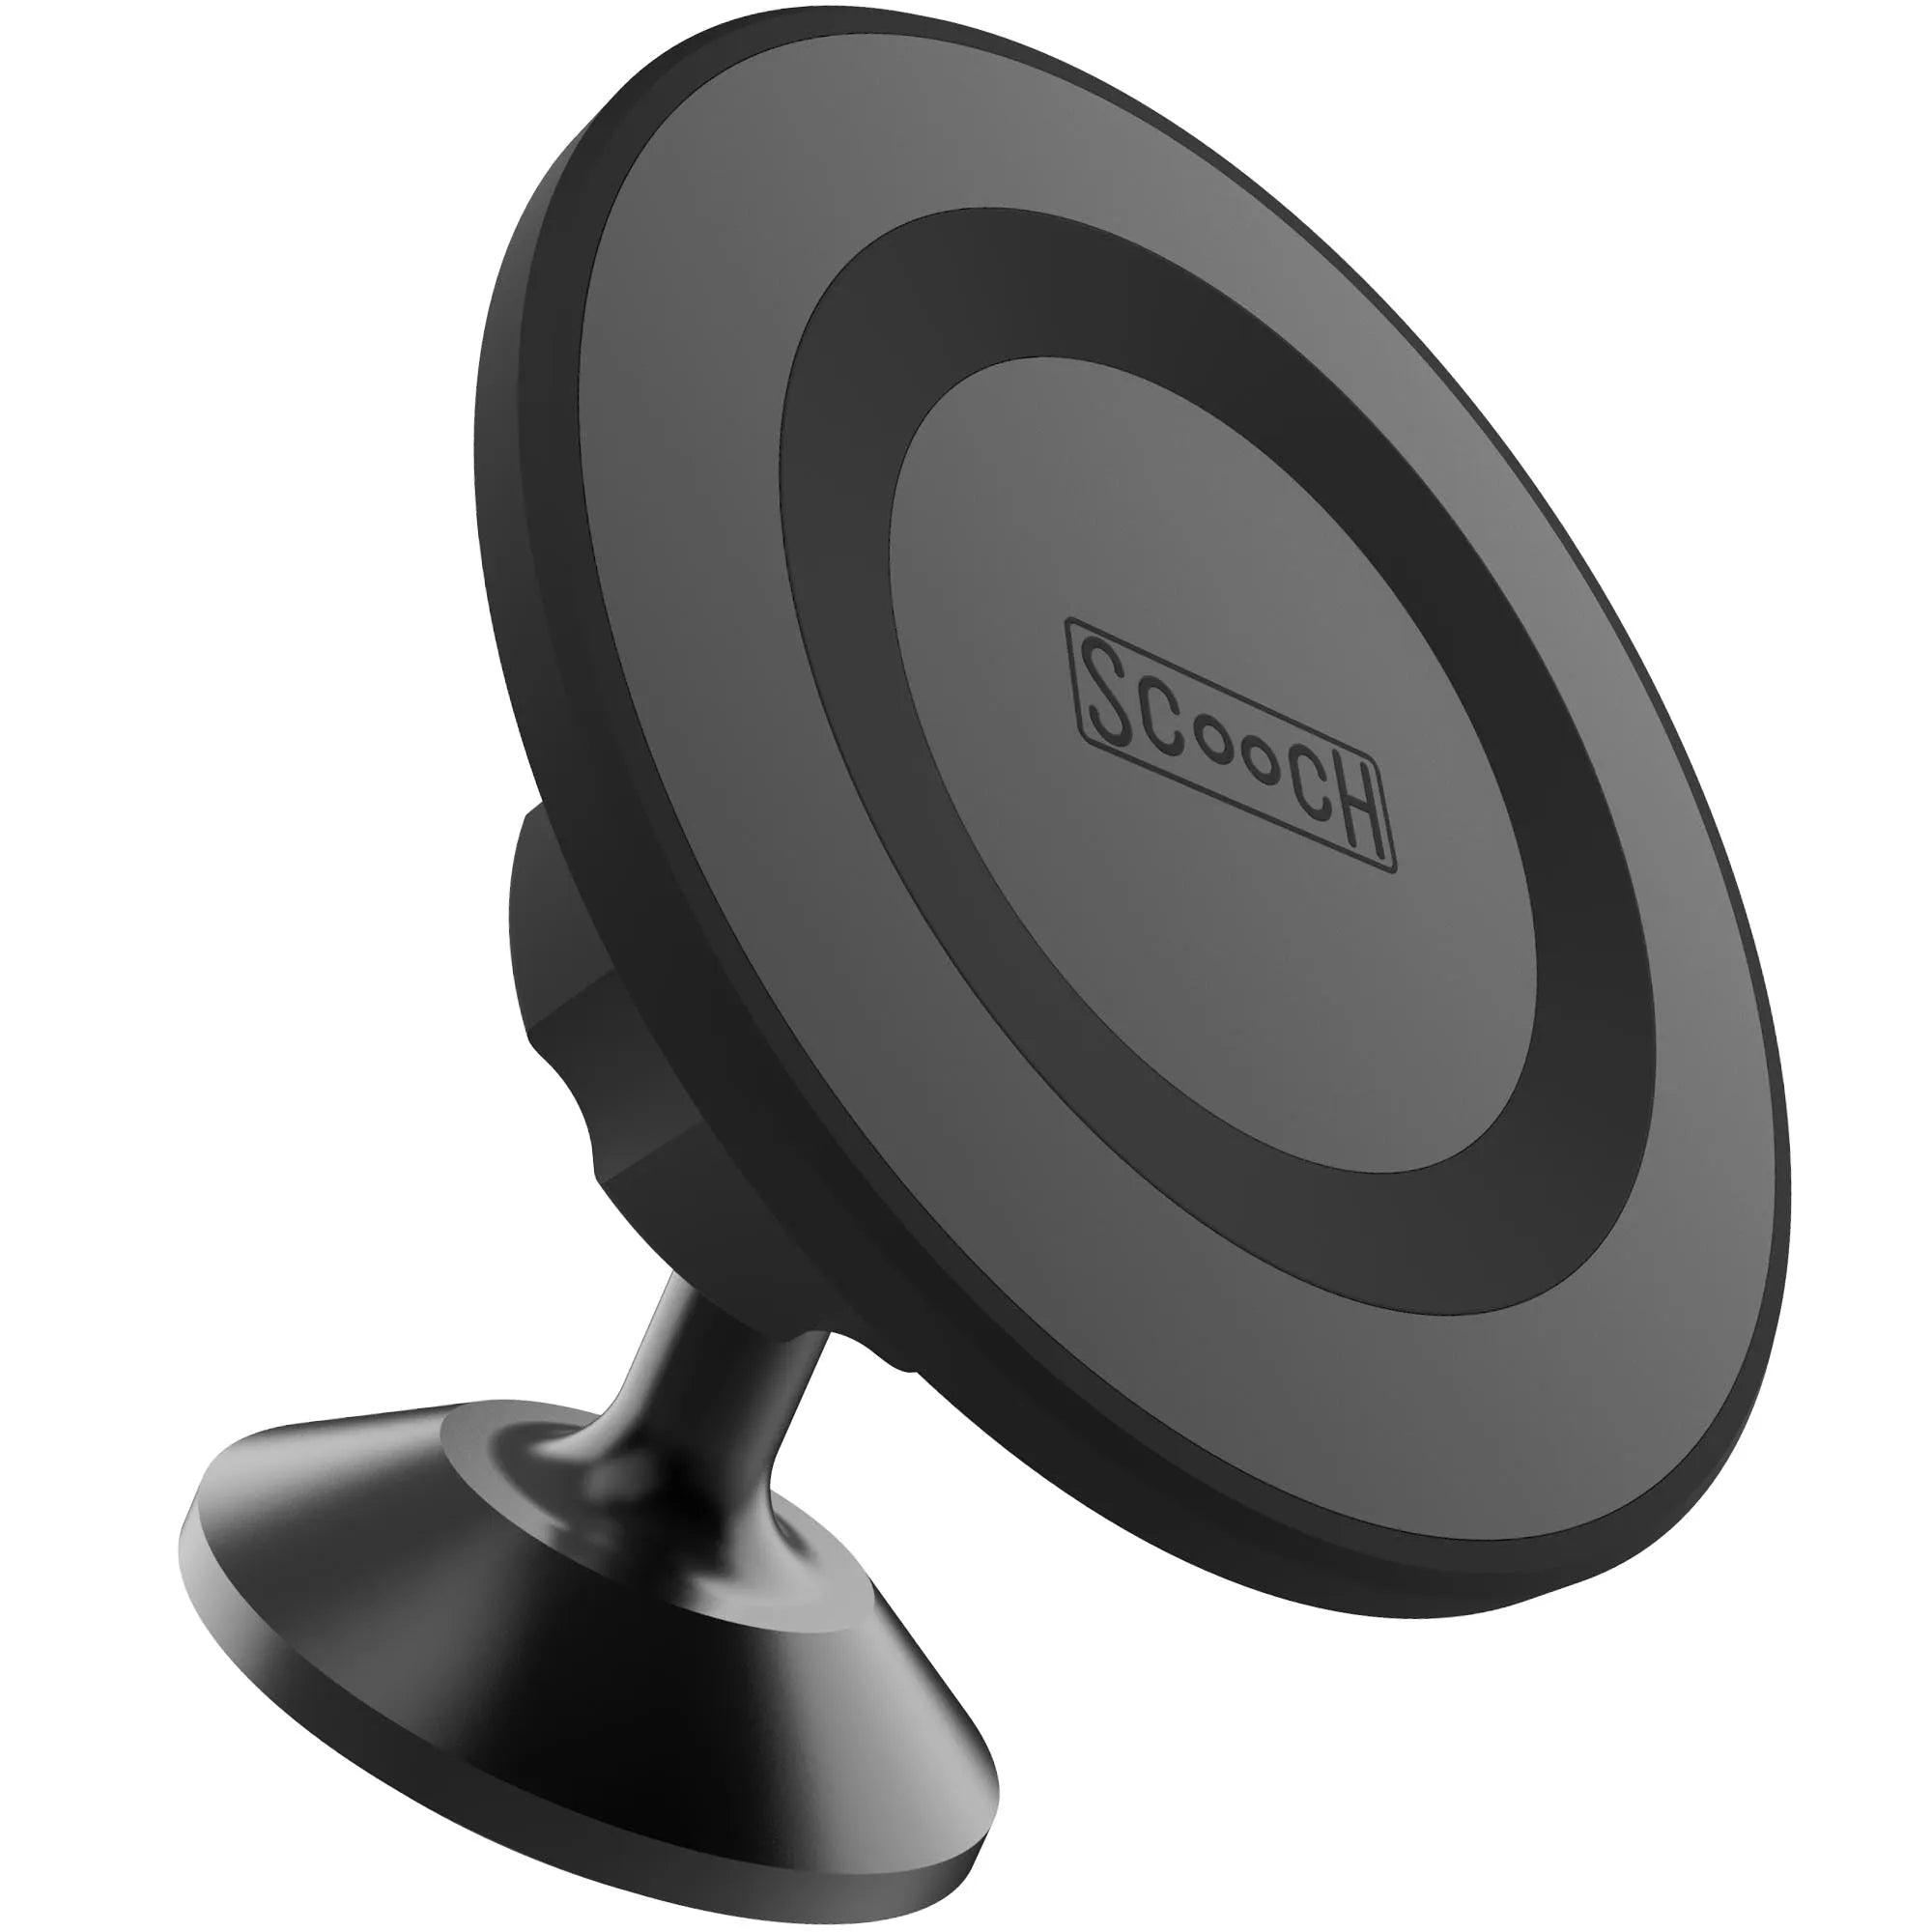 Compact MagSafe Car Mount - MagMount by Scooch